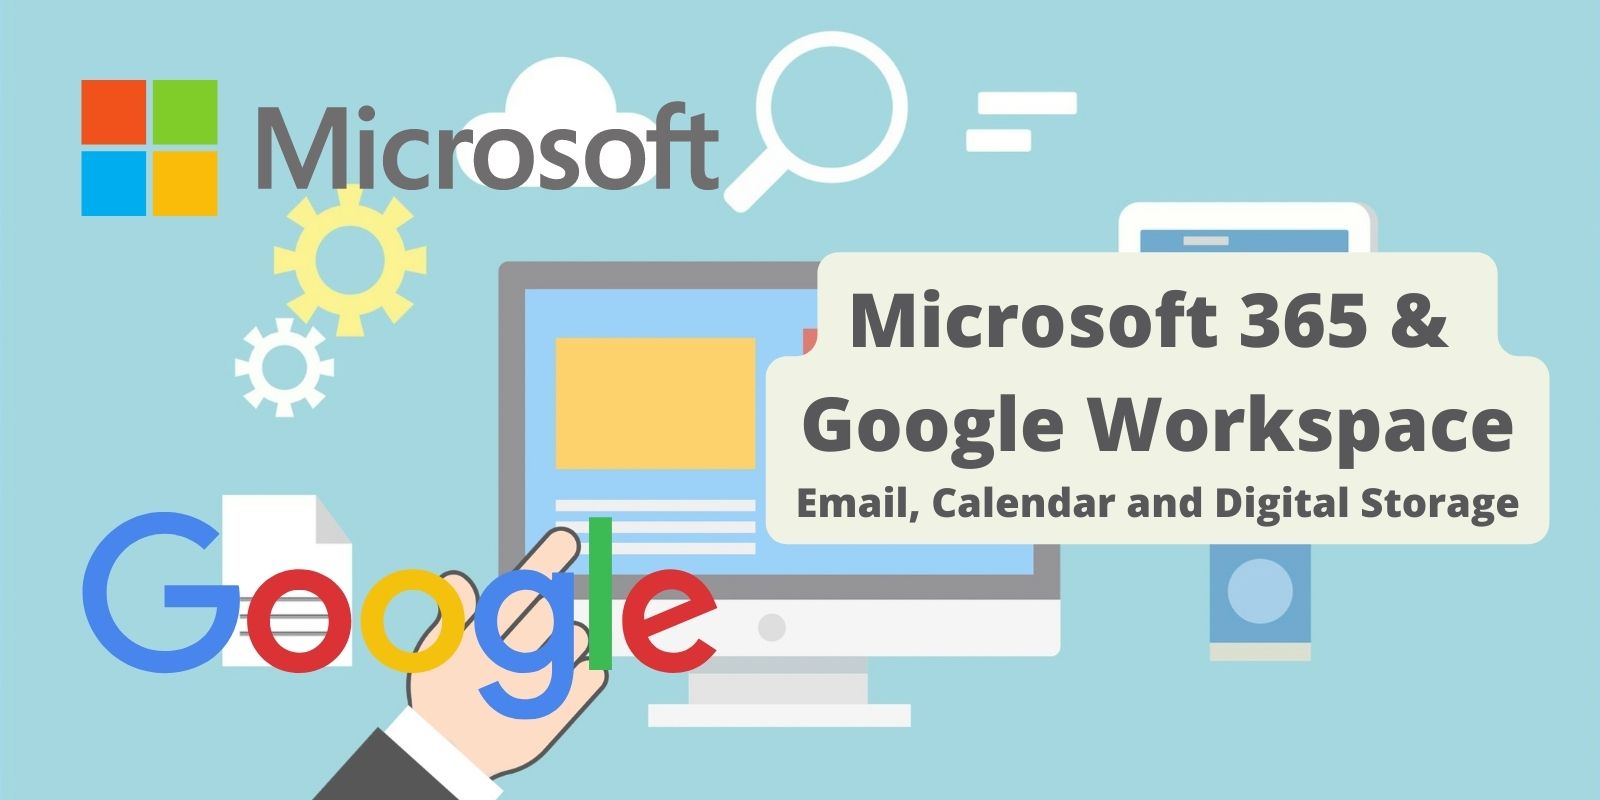 Google Workspace Business Email & Productivity Suite